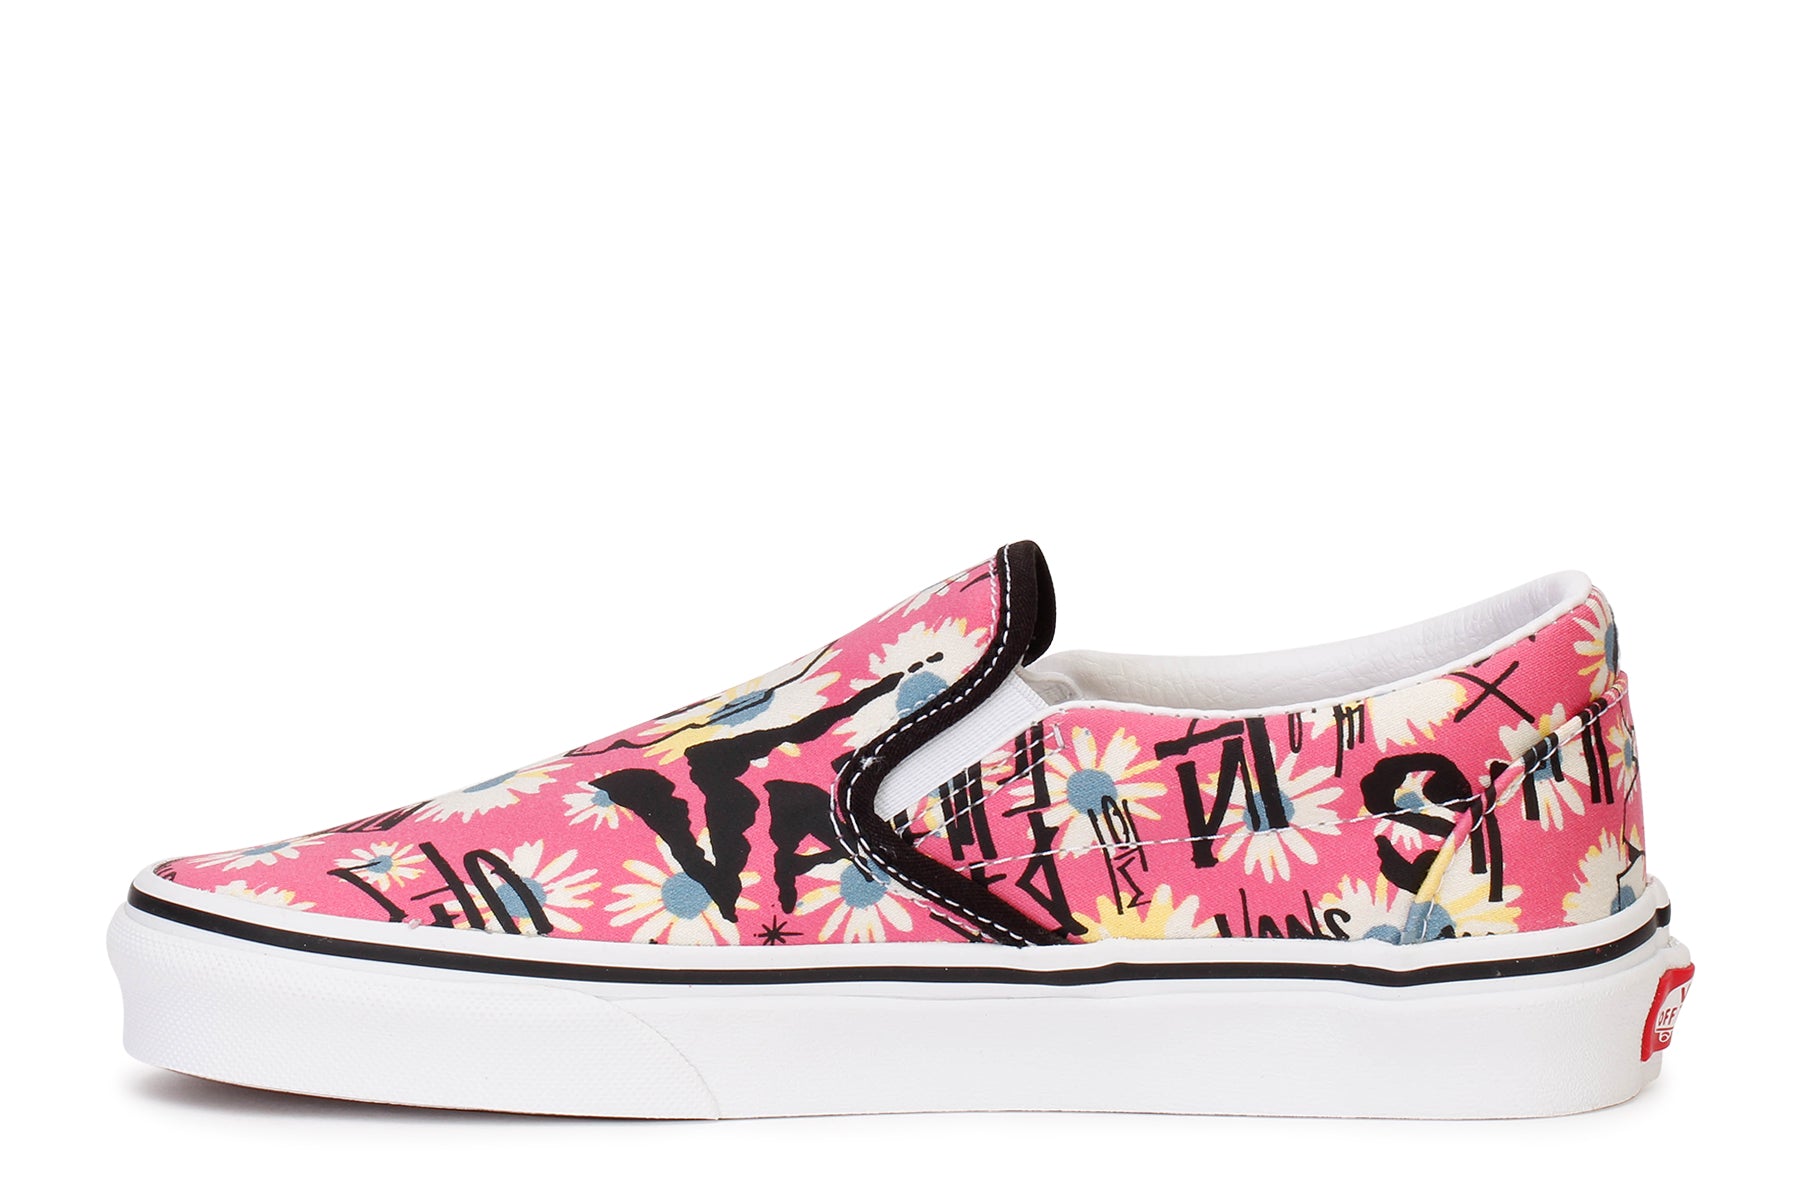 VANS Classic Slip-On Athletic Shoes for Women for sale